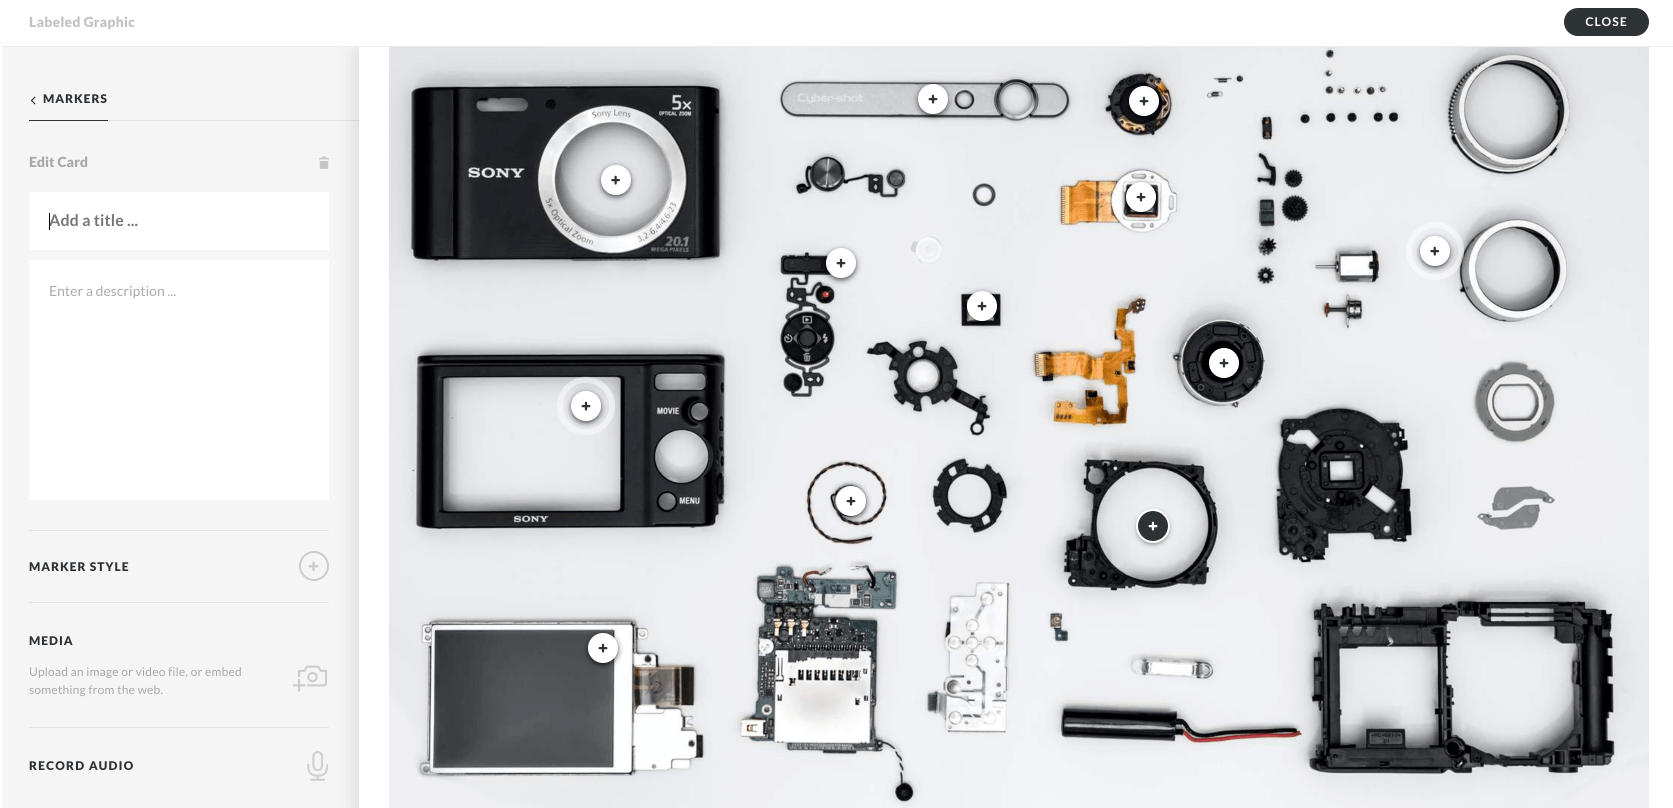 Articulate Rise edit view showing a label diagram of the parts of a camera